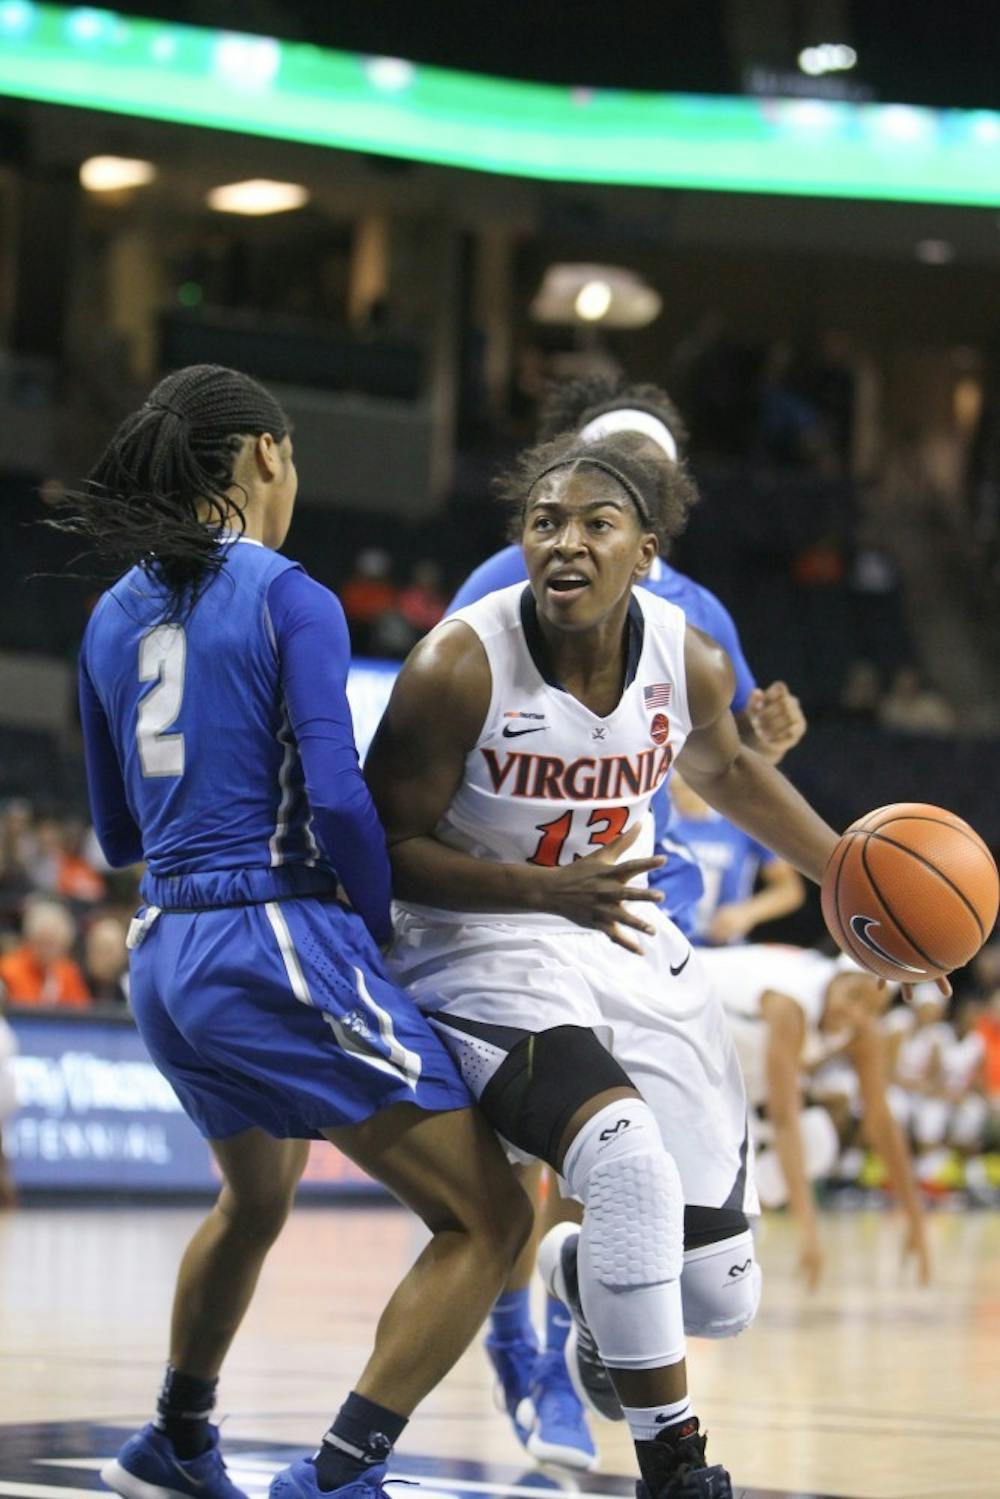 <p>Virginia sophomore guard Jocelyn Willoughby led all scorers with 18 points in Thursday night's match against Boston College.</p>